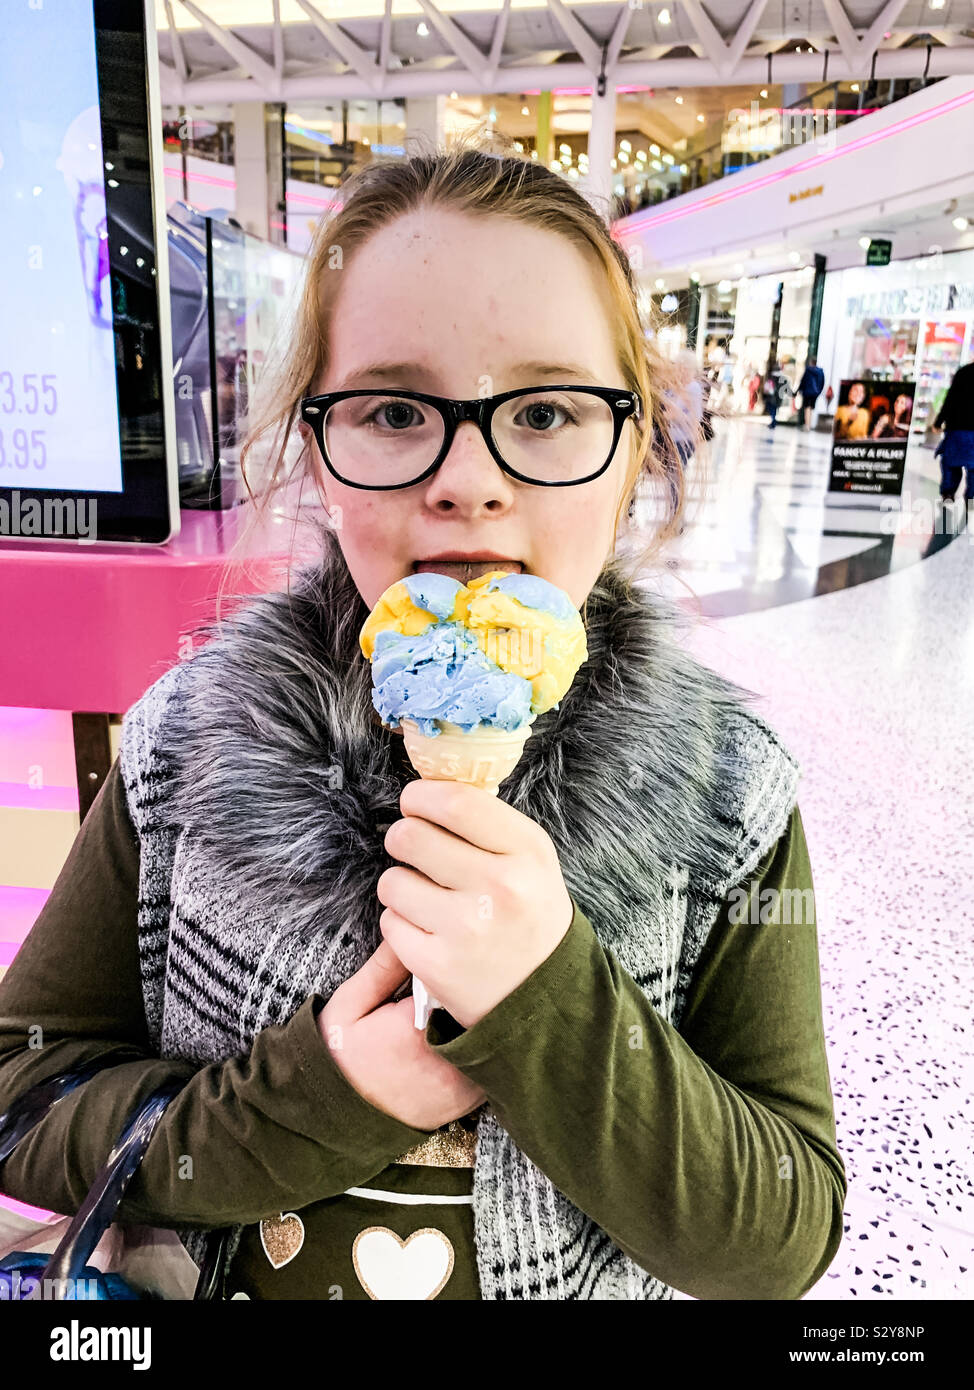 Young girl licking an ice cream cone in a shopping centre Stock Photo